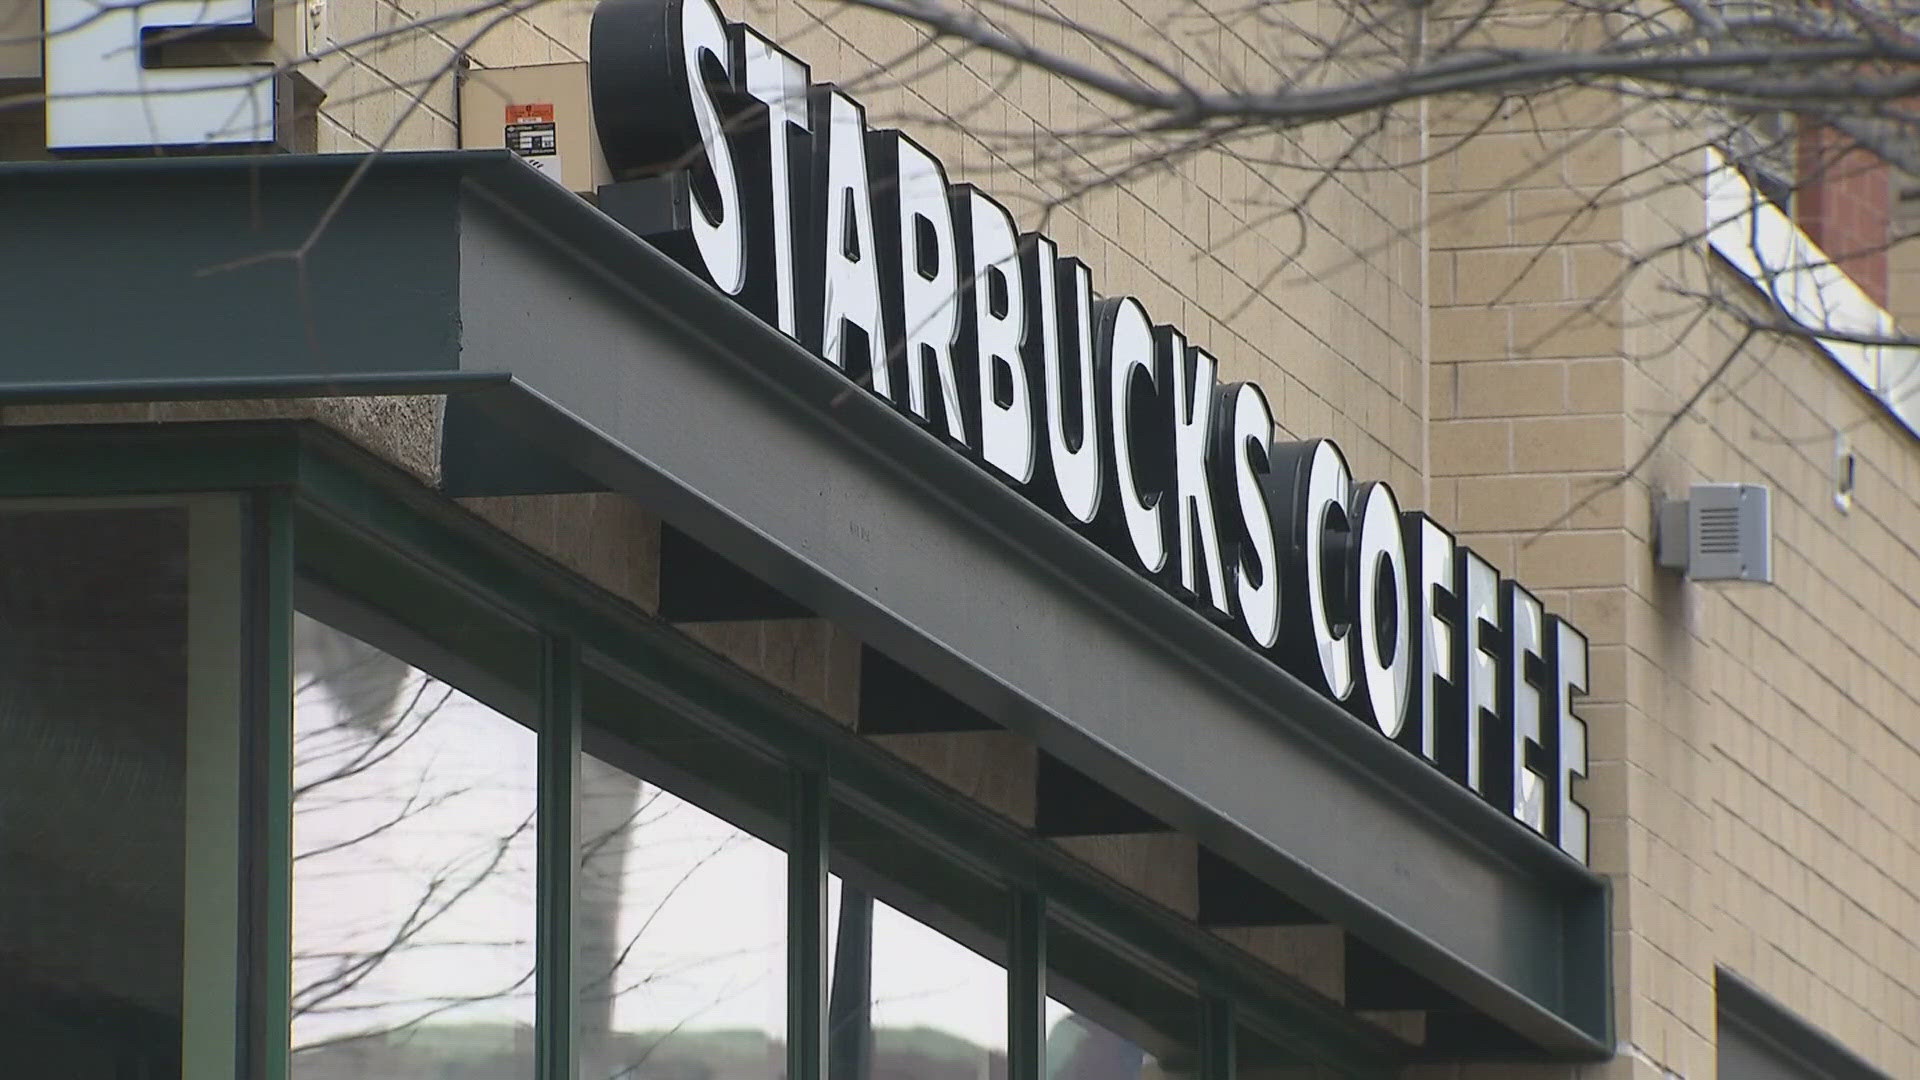 A woman from Colorado Springs has filed a class action lawsuit against Starbucks overs surcharges for non-dairy milk alternatives.